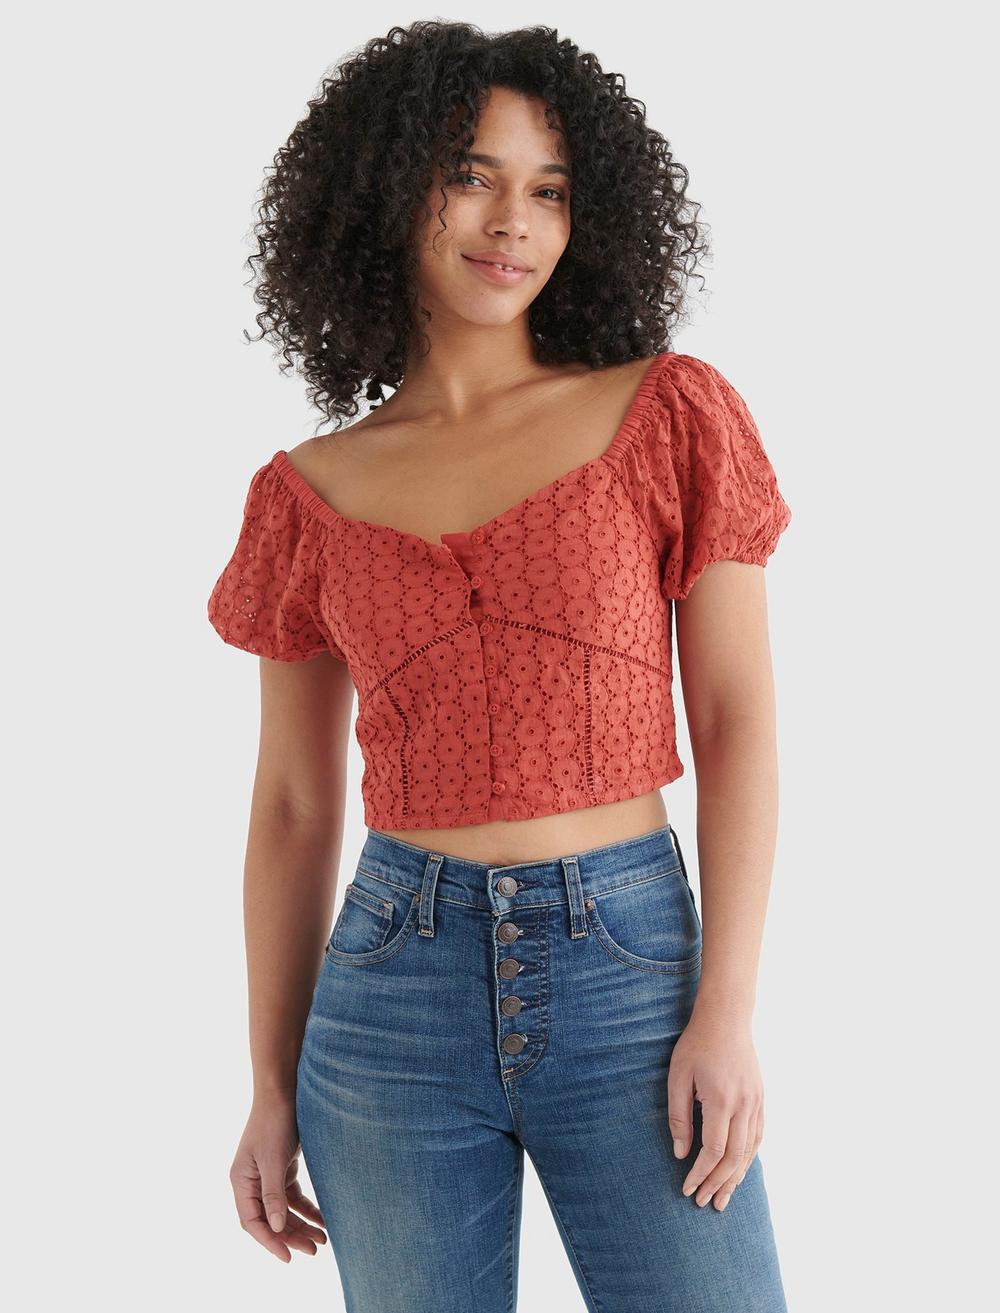 LACE SWEETHEART CROP TOP, image 2